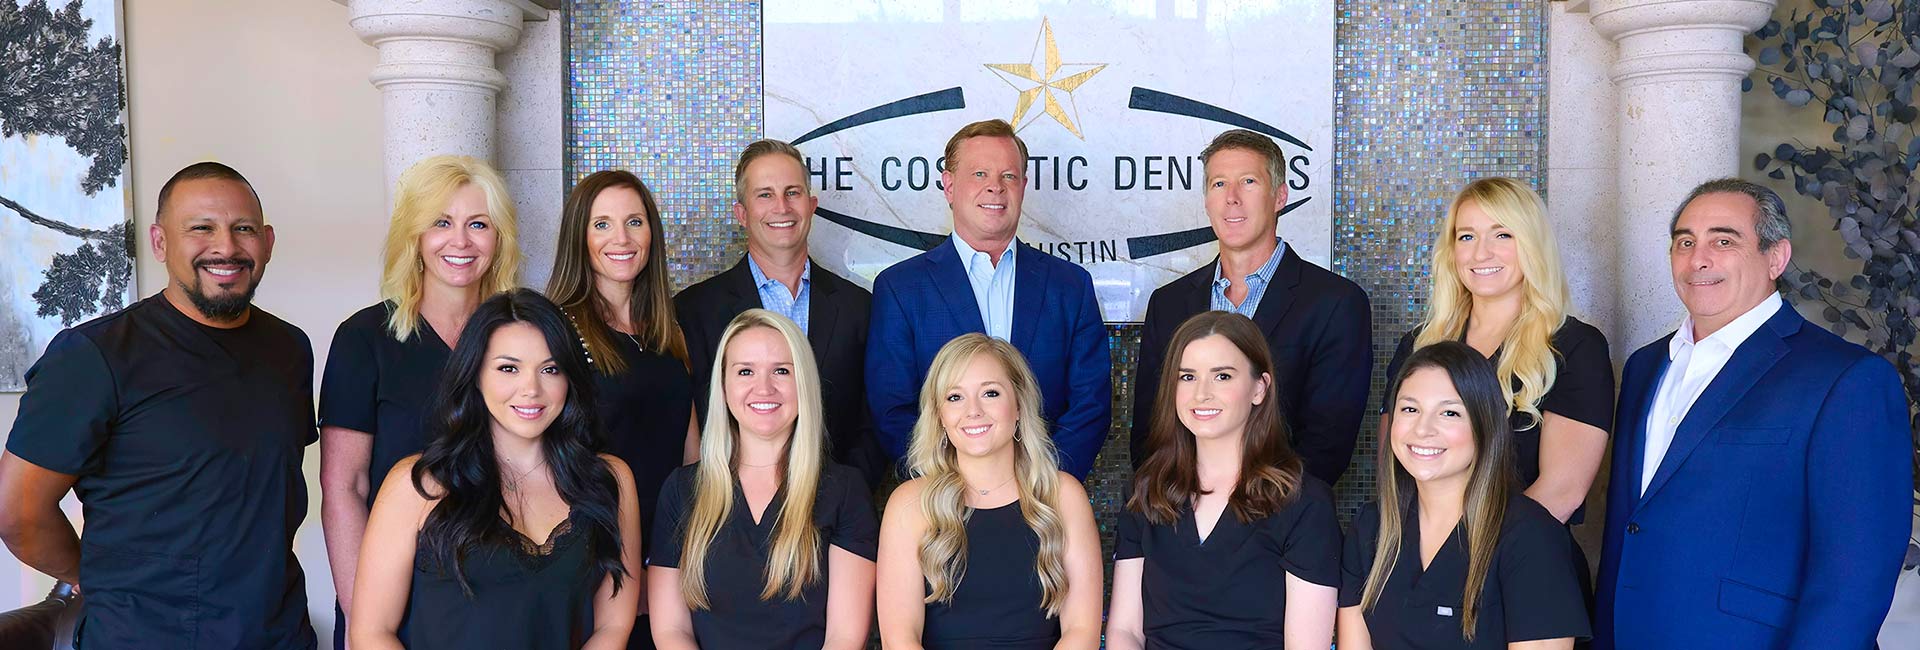 Group photo of Austin's best cosmetic dentistry team - The Cosmetic Dentists of Austin's entire staff, dedicated to exceptional dental care.